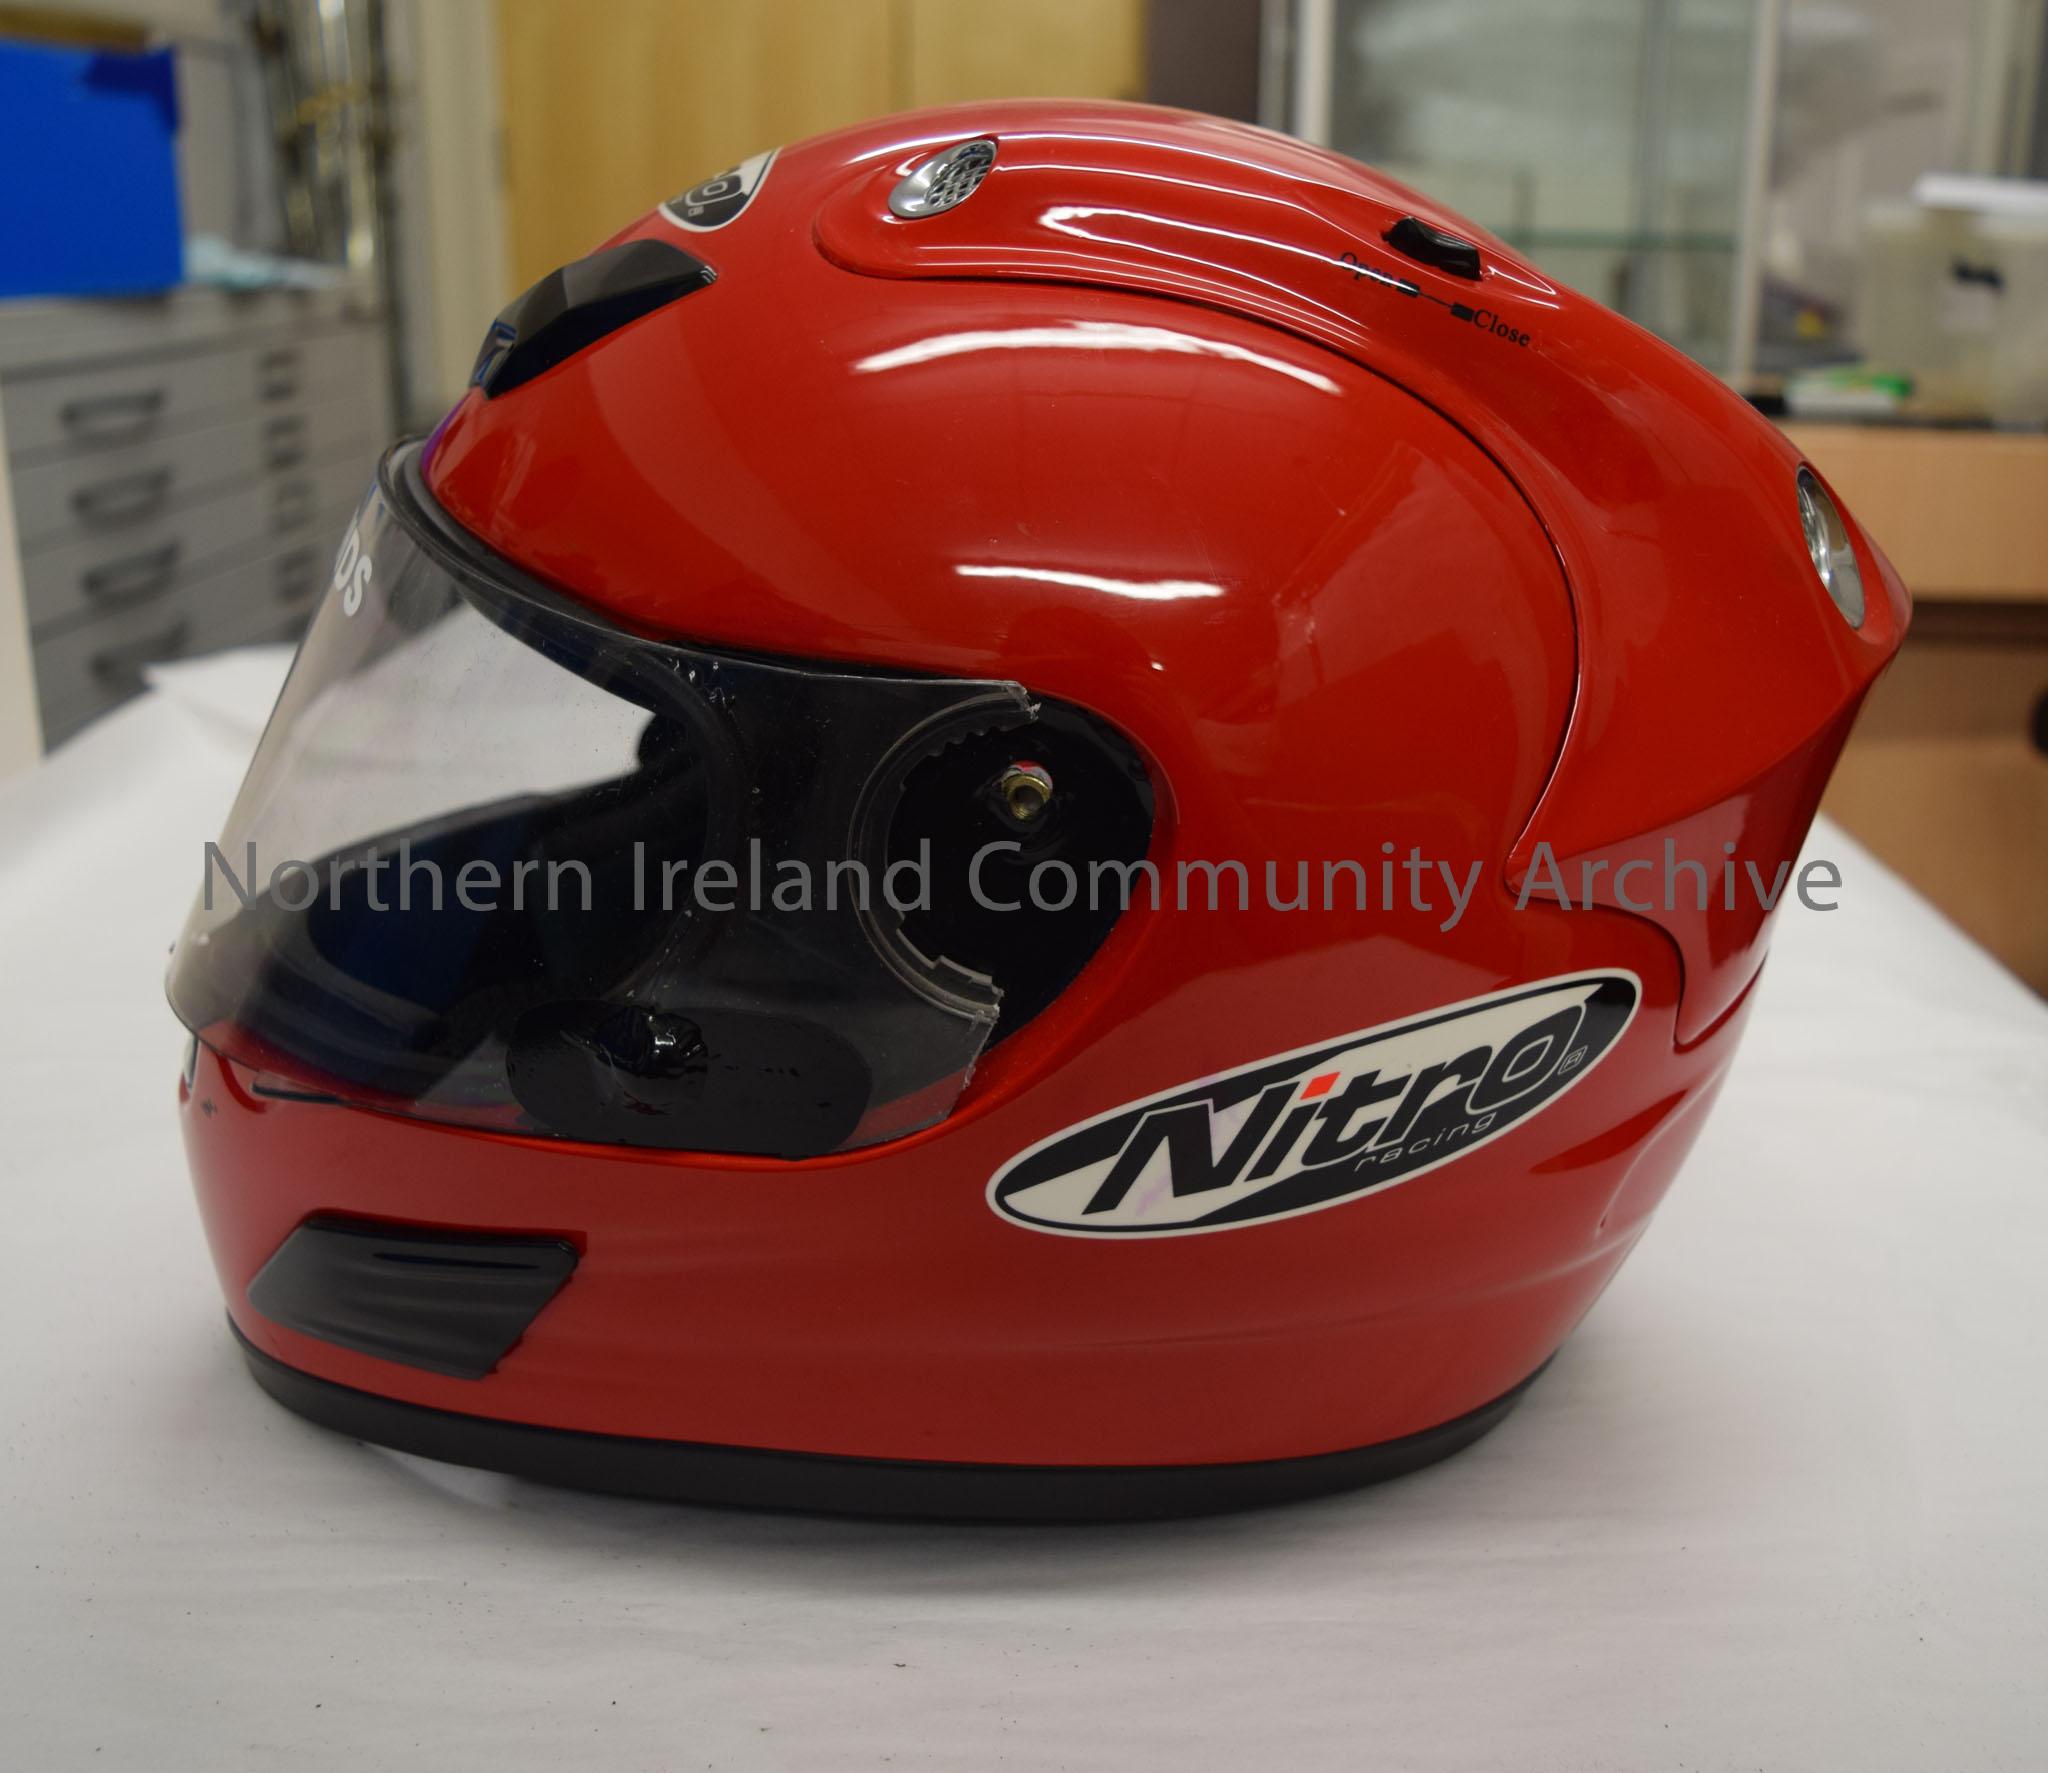 Nitro Racing motorcycle helmet belonging to Jack Sands. Plain red with silver vents. – 2016.78 (3)